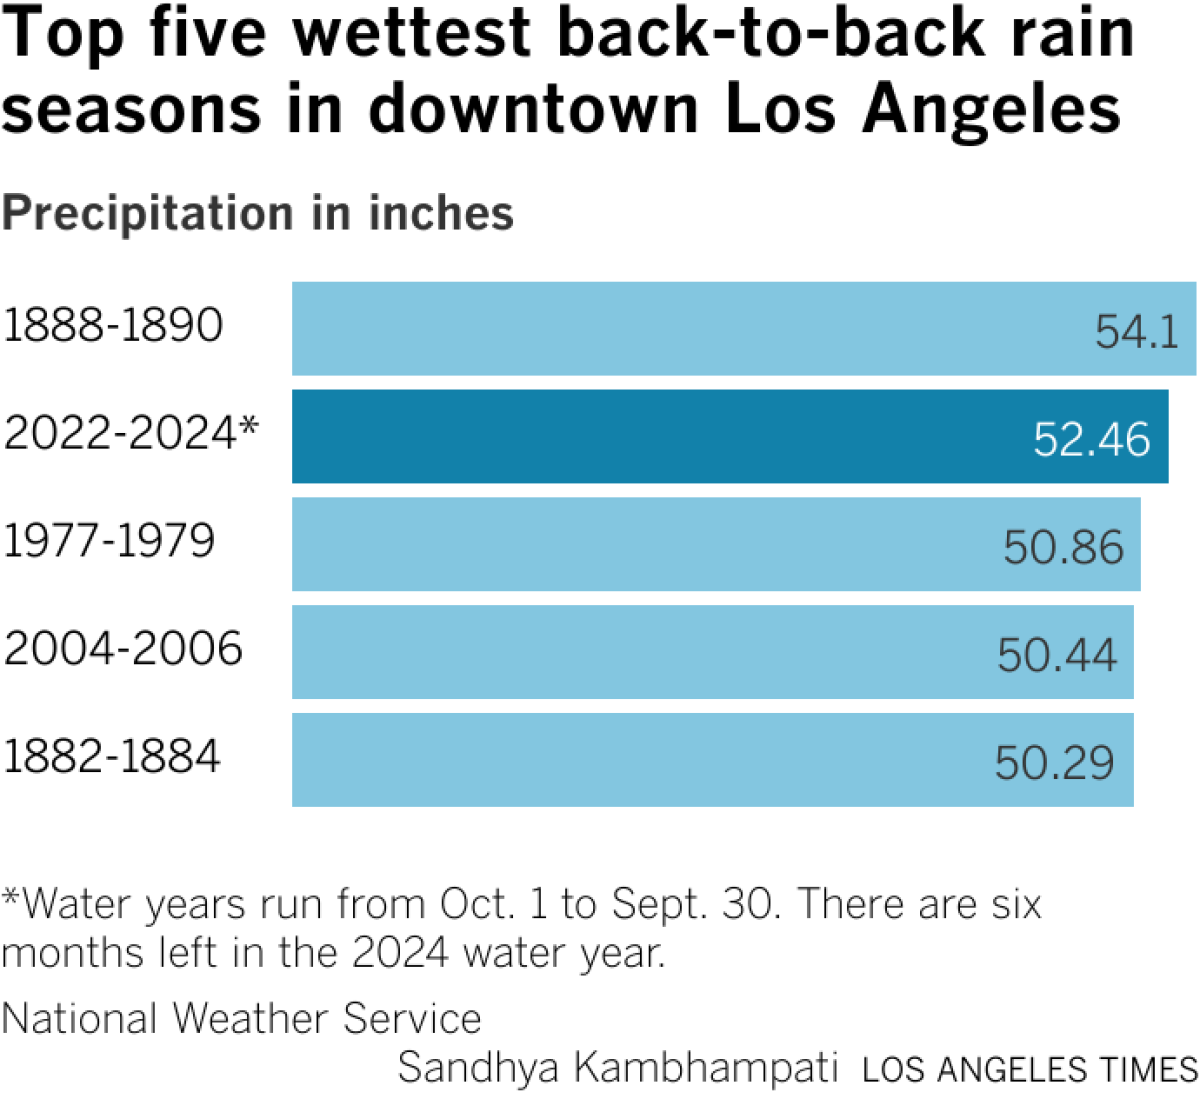 A bar chart showing the five wettest rain seasons in downtown LA. October 1888 to 1890 had the most rain at 54.1 inches, followed by 2022 to 2024. 